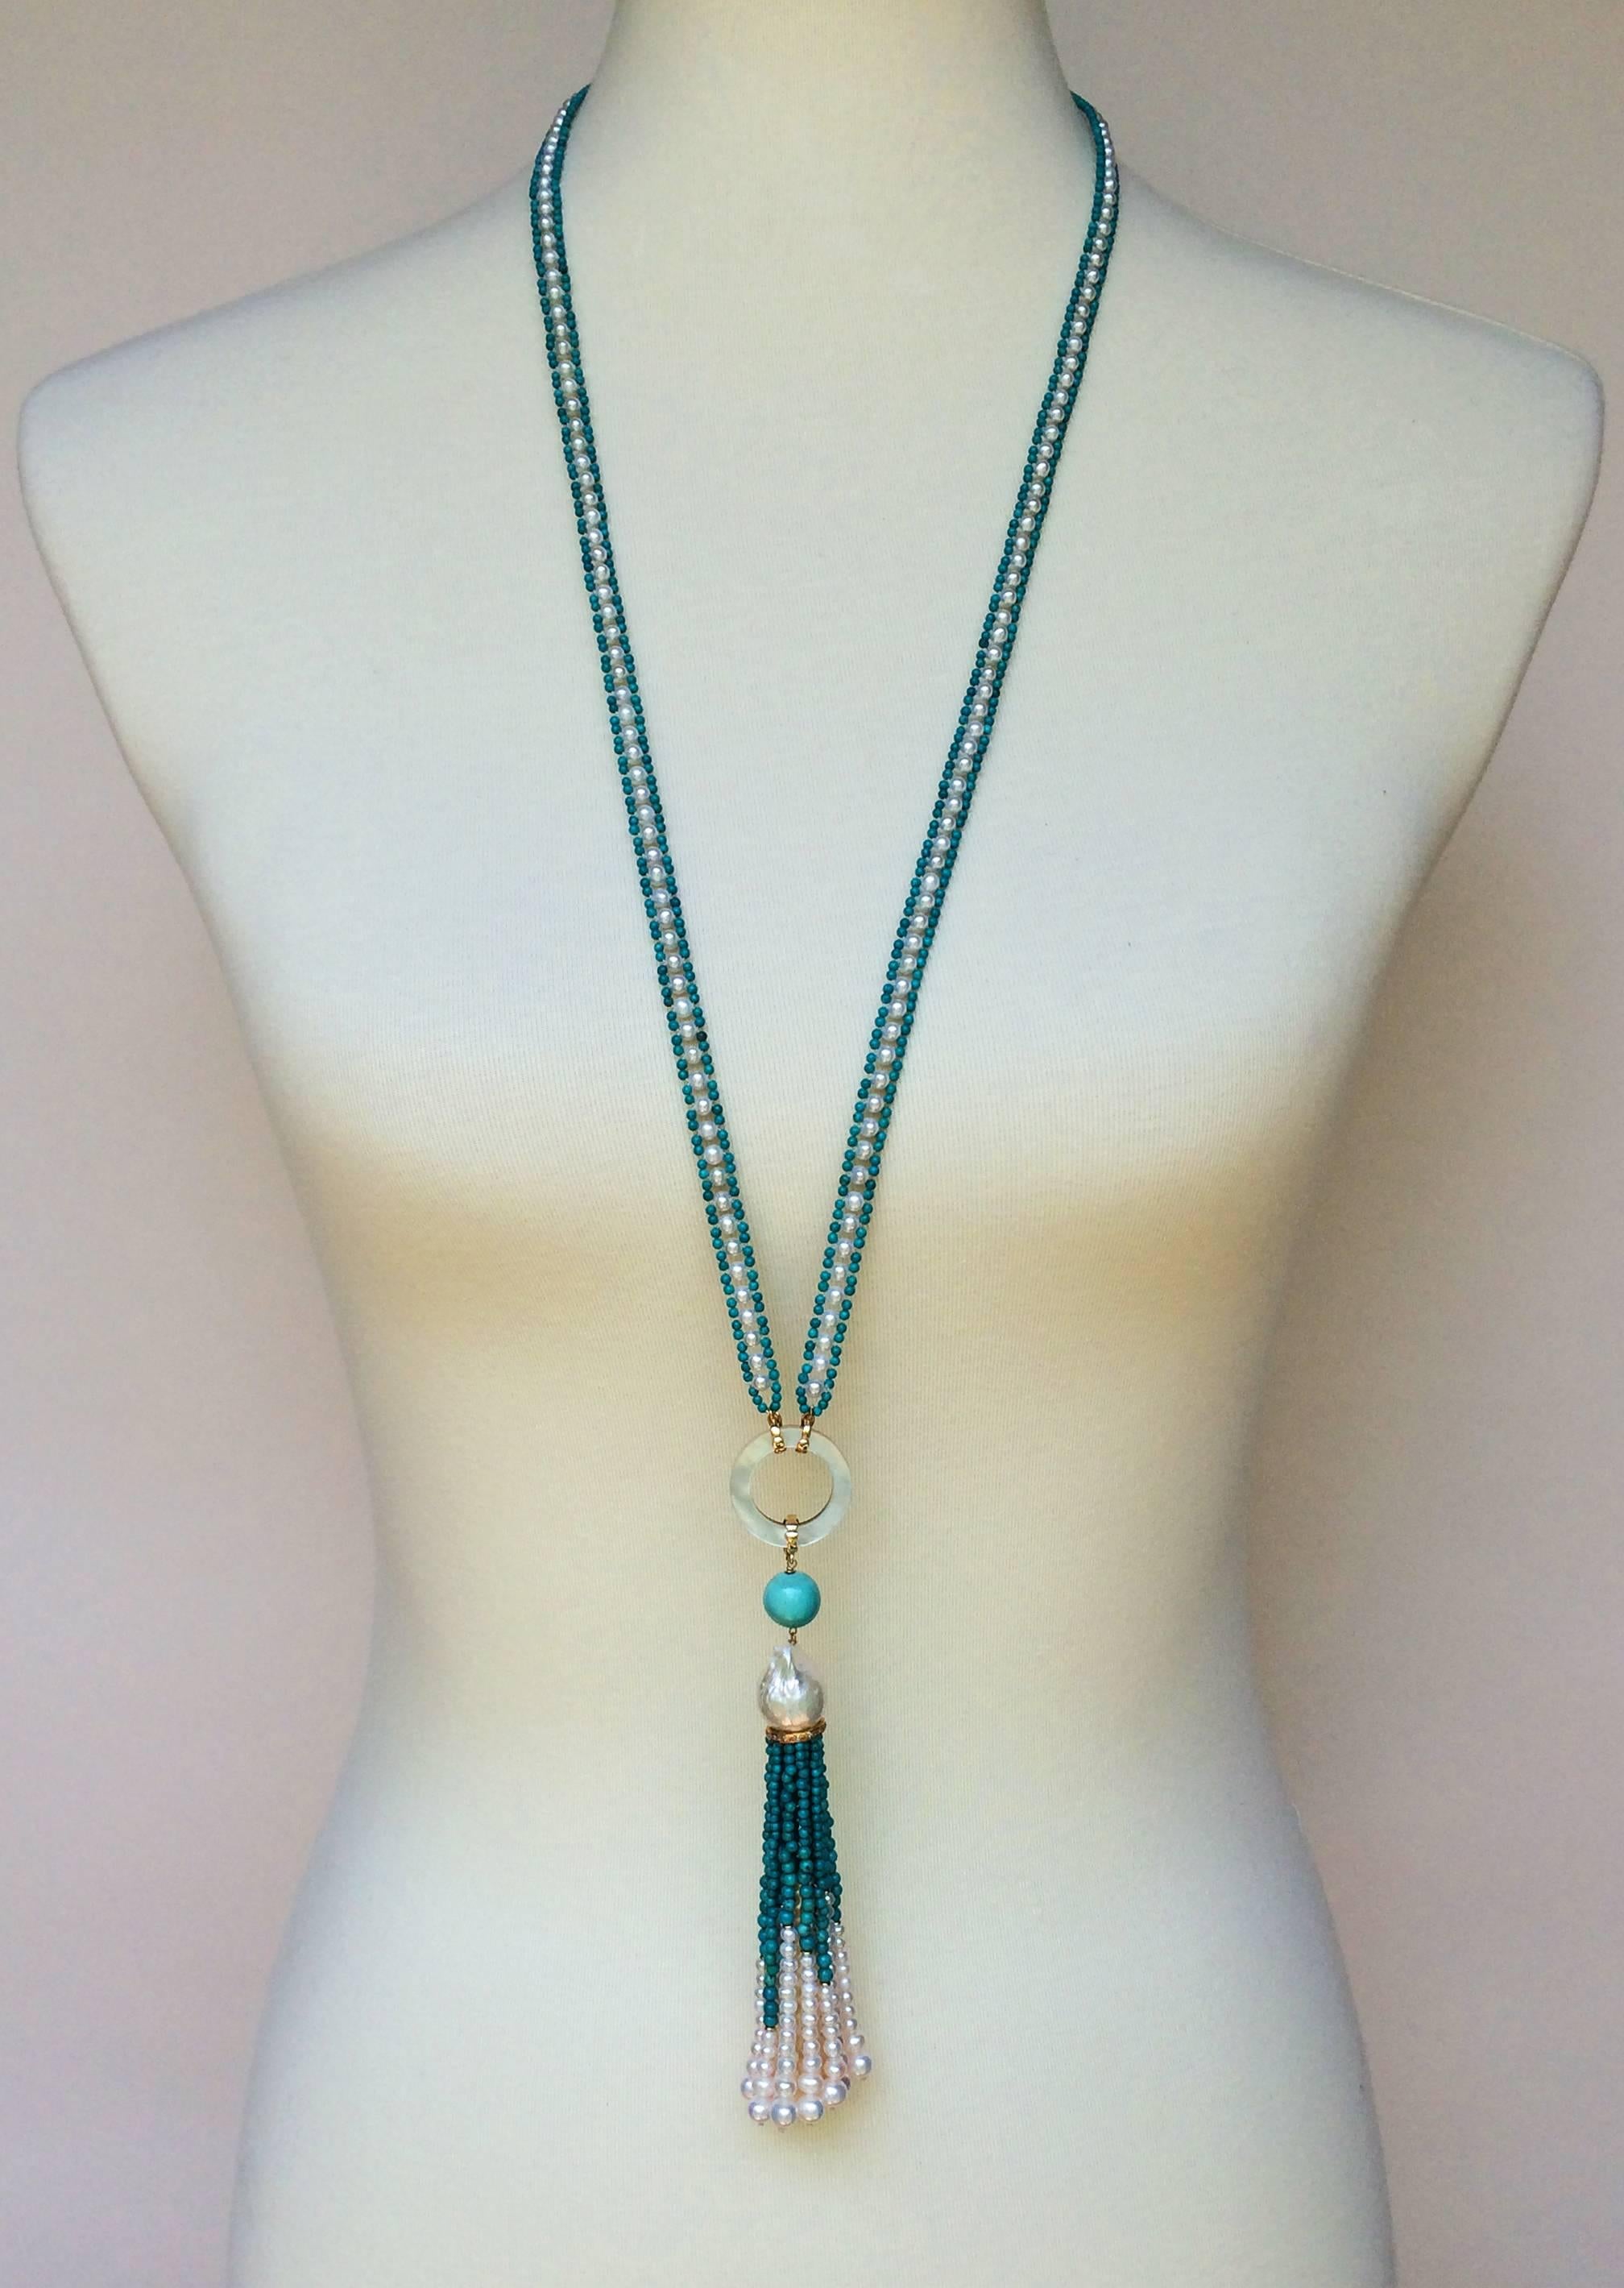 This pearl and turquoise sautoir is multi-functional and timeless. Since it is so versatile you can wear this necklace to any occasion. The ribbon is made by tightly weaving 3 mm pearls with 1.5 mm turquoise beads into a symmetrical weave, resulting